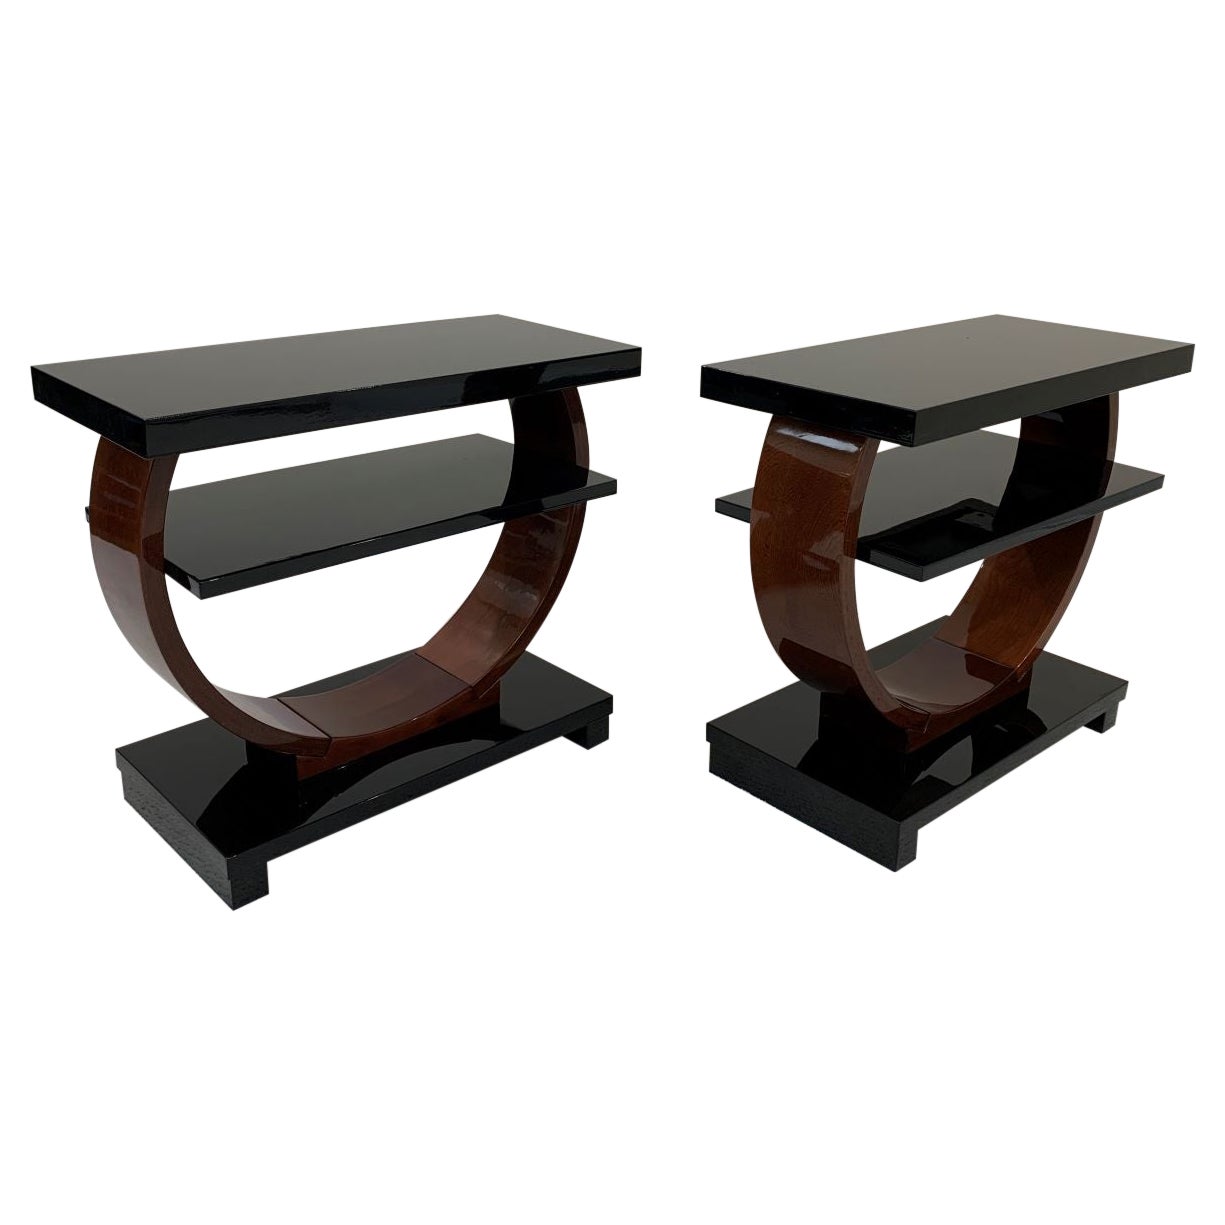 Art Deco Machine Age End Tables by Modernage Furniture Company, Circa 1930's For Sale